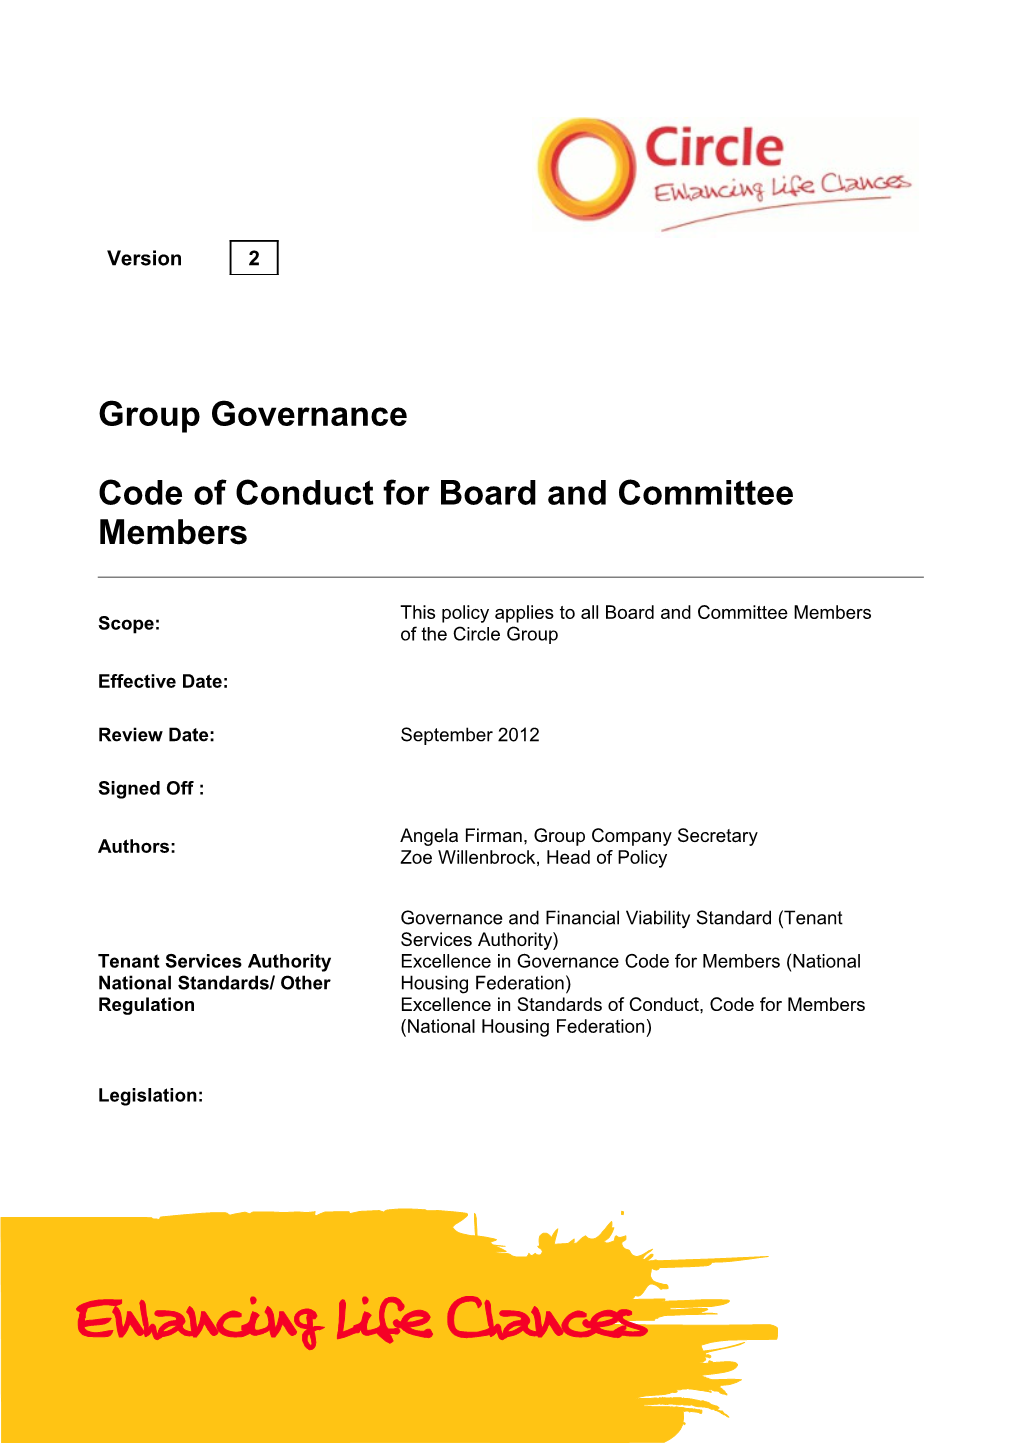 Code of Conduct for Board and Committee Members